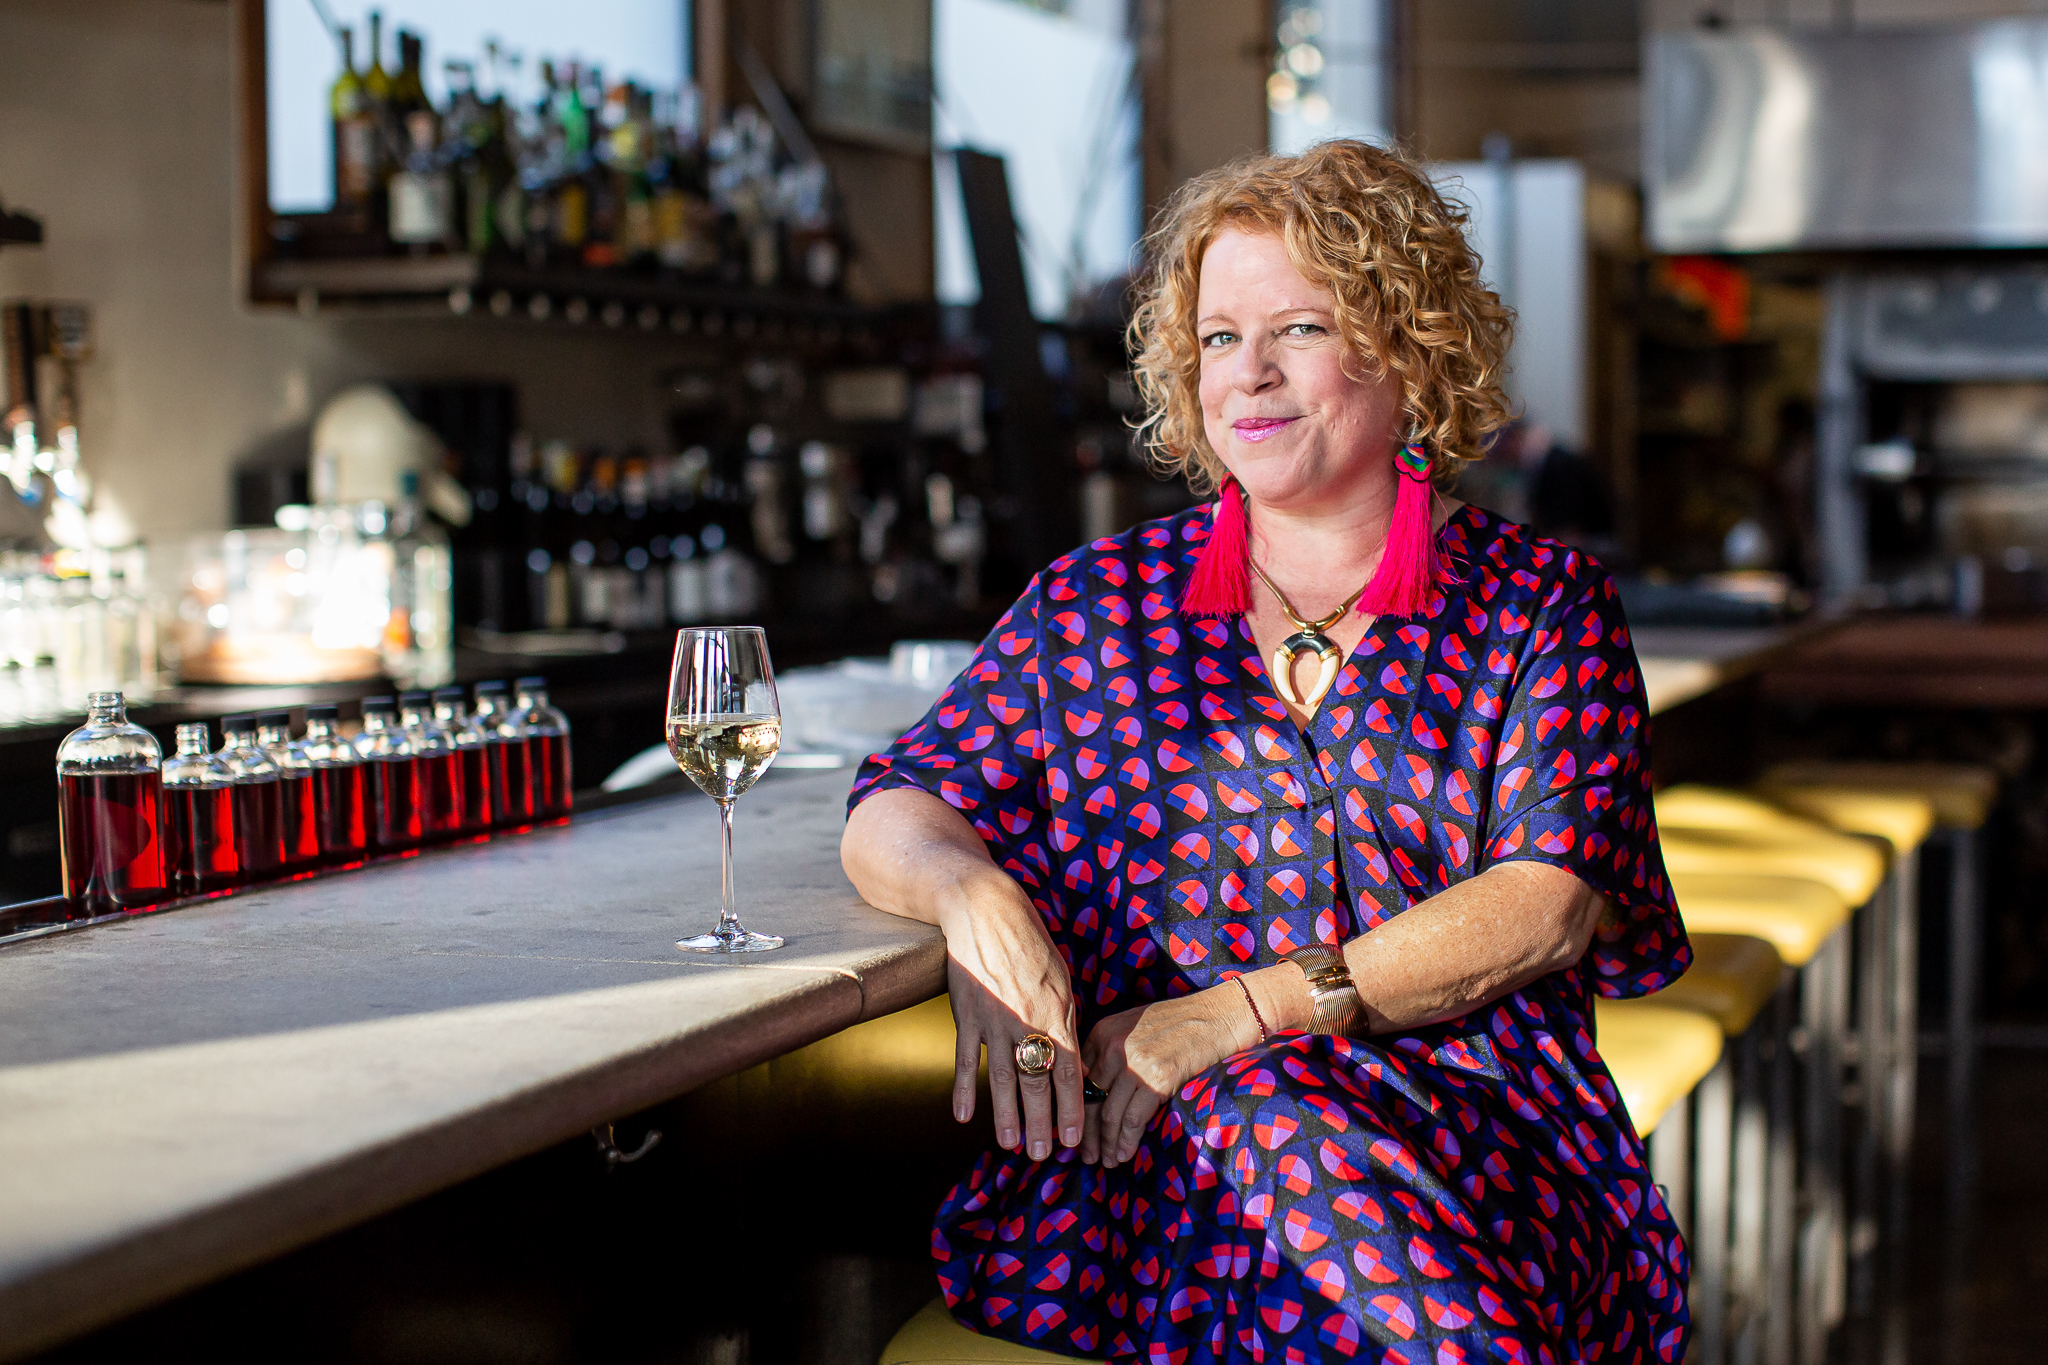 For 15 Years, This Woman Has Been One Of Sf’s Best Food Insiders photo